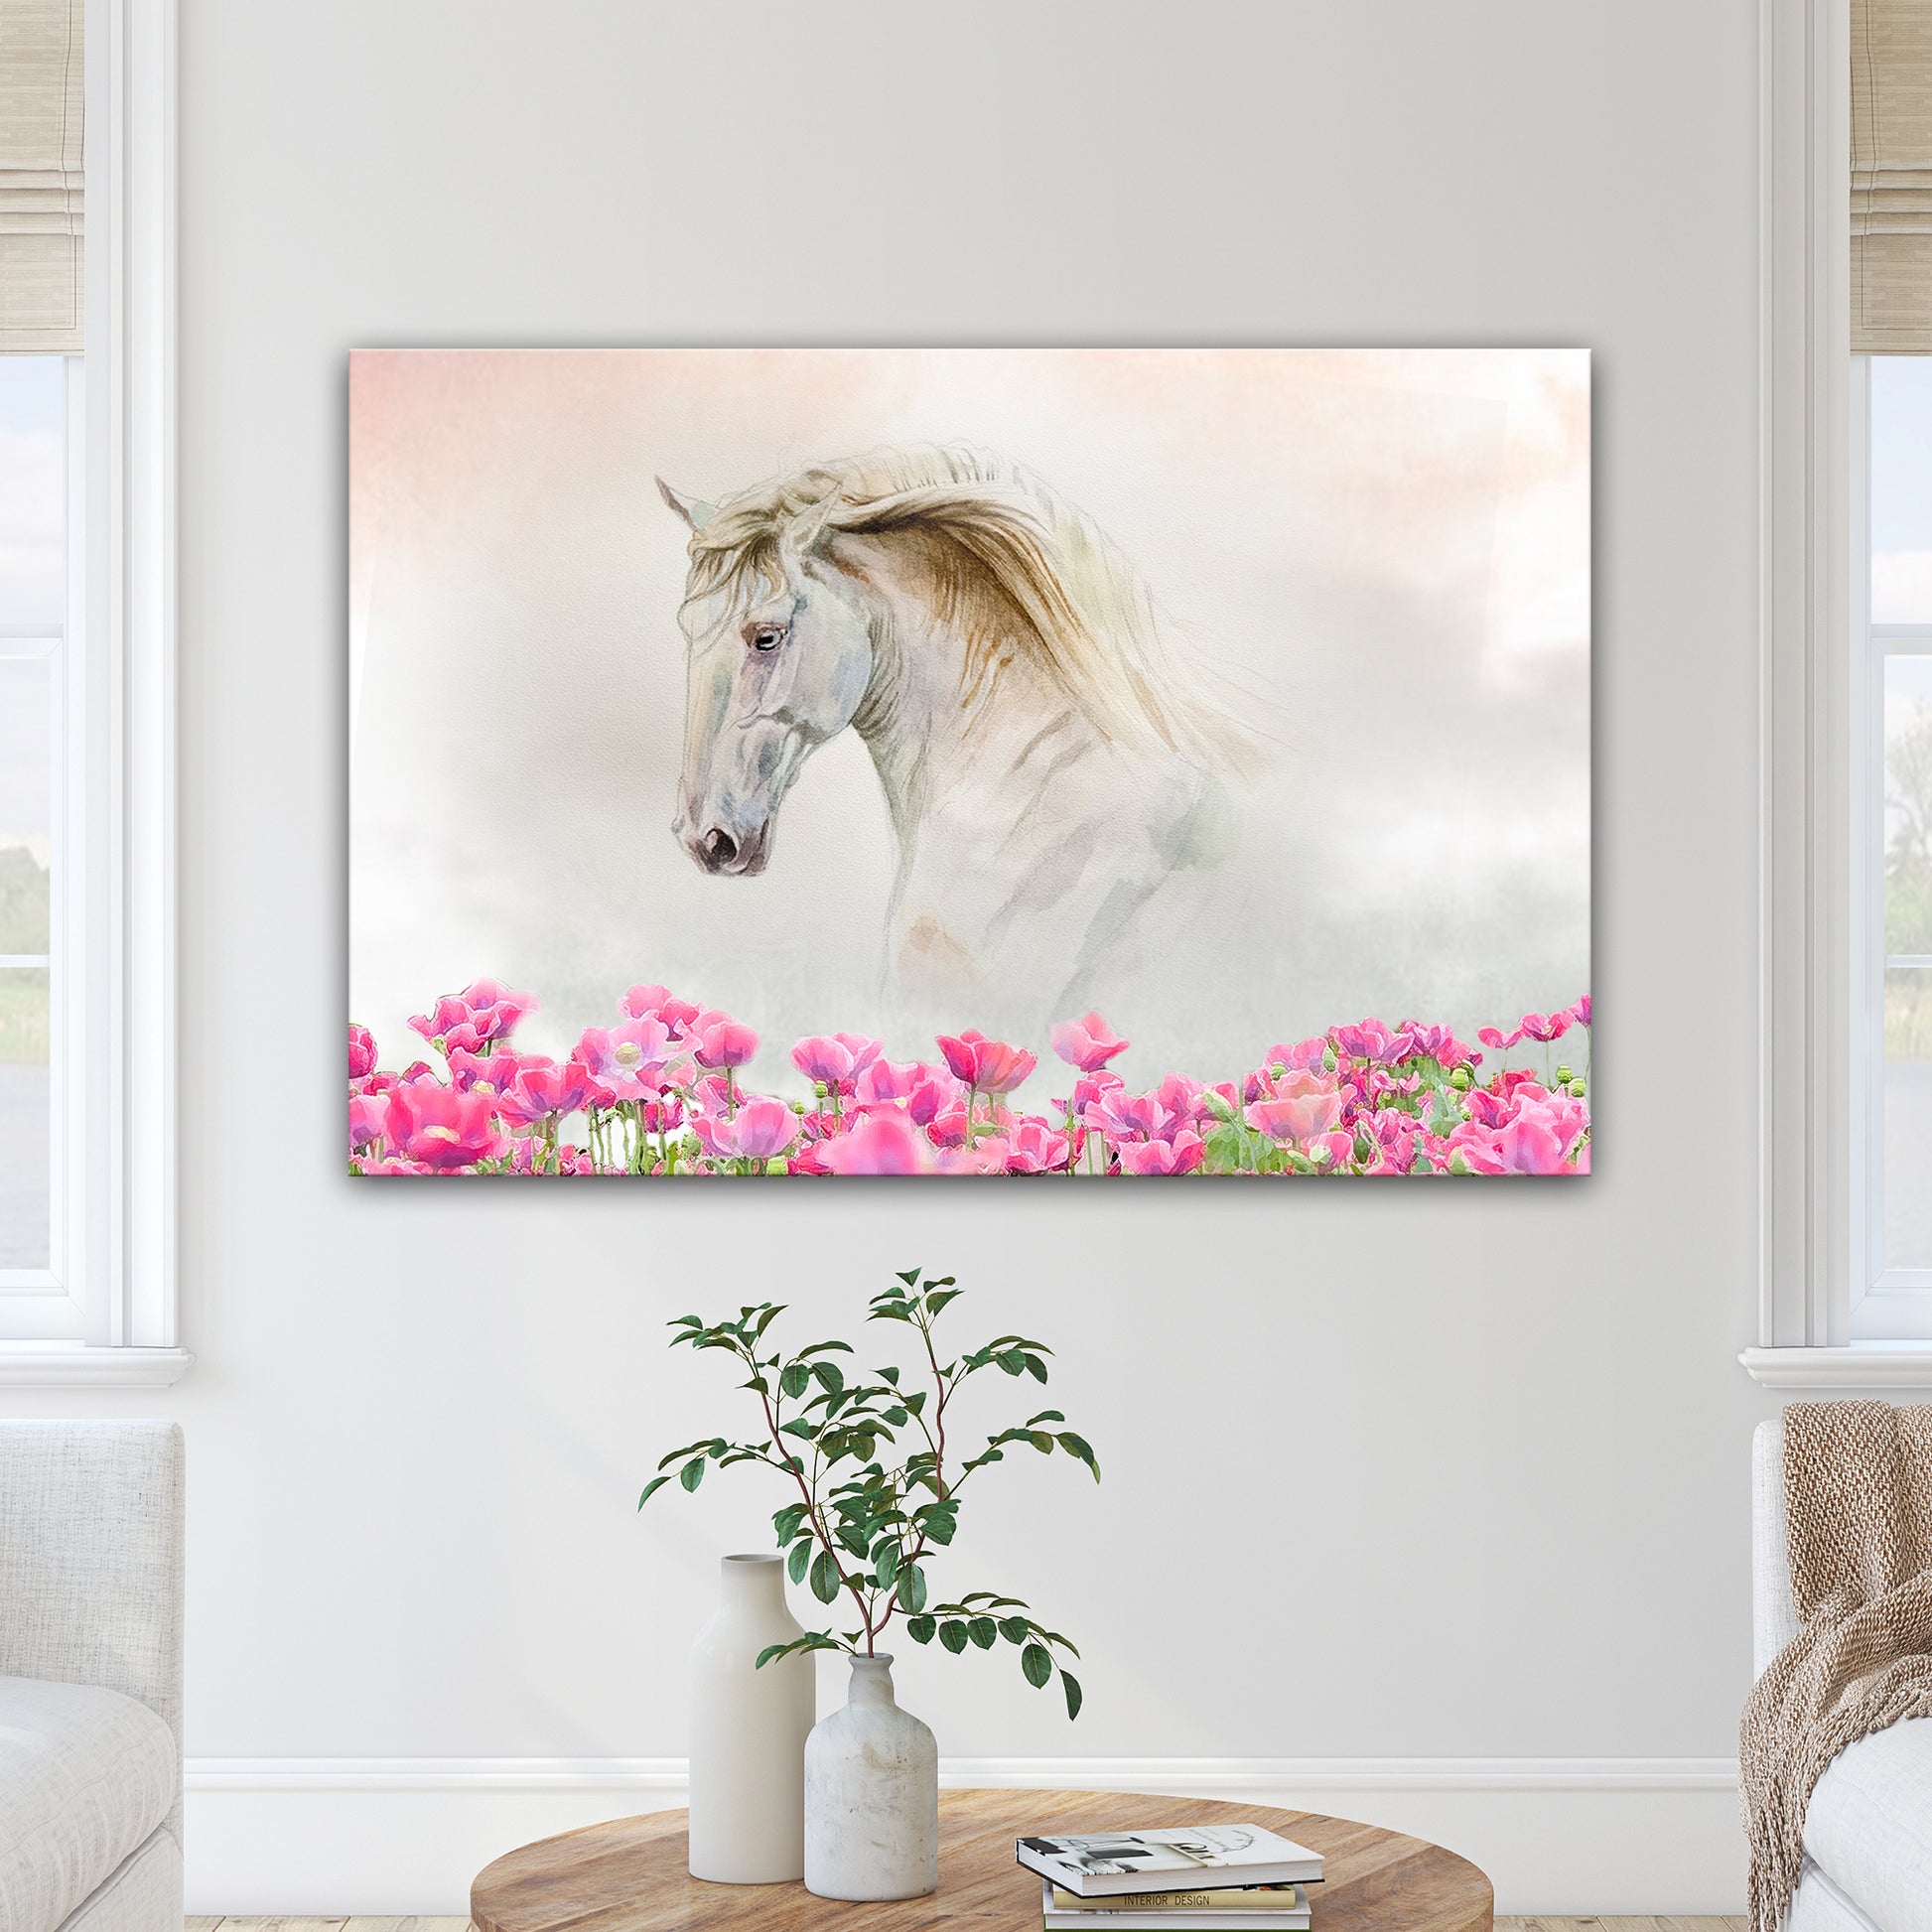 Floral White Horse - Image by Tailored Canvases